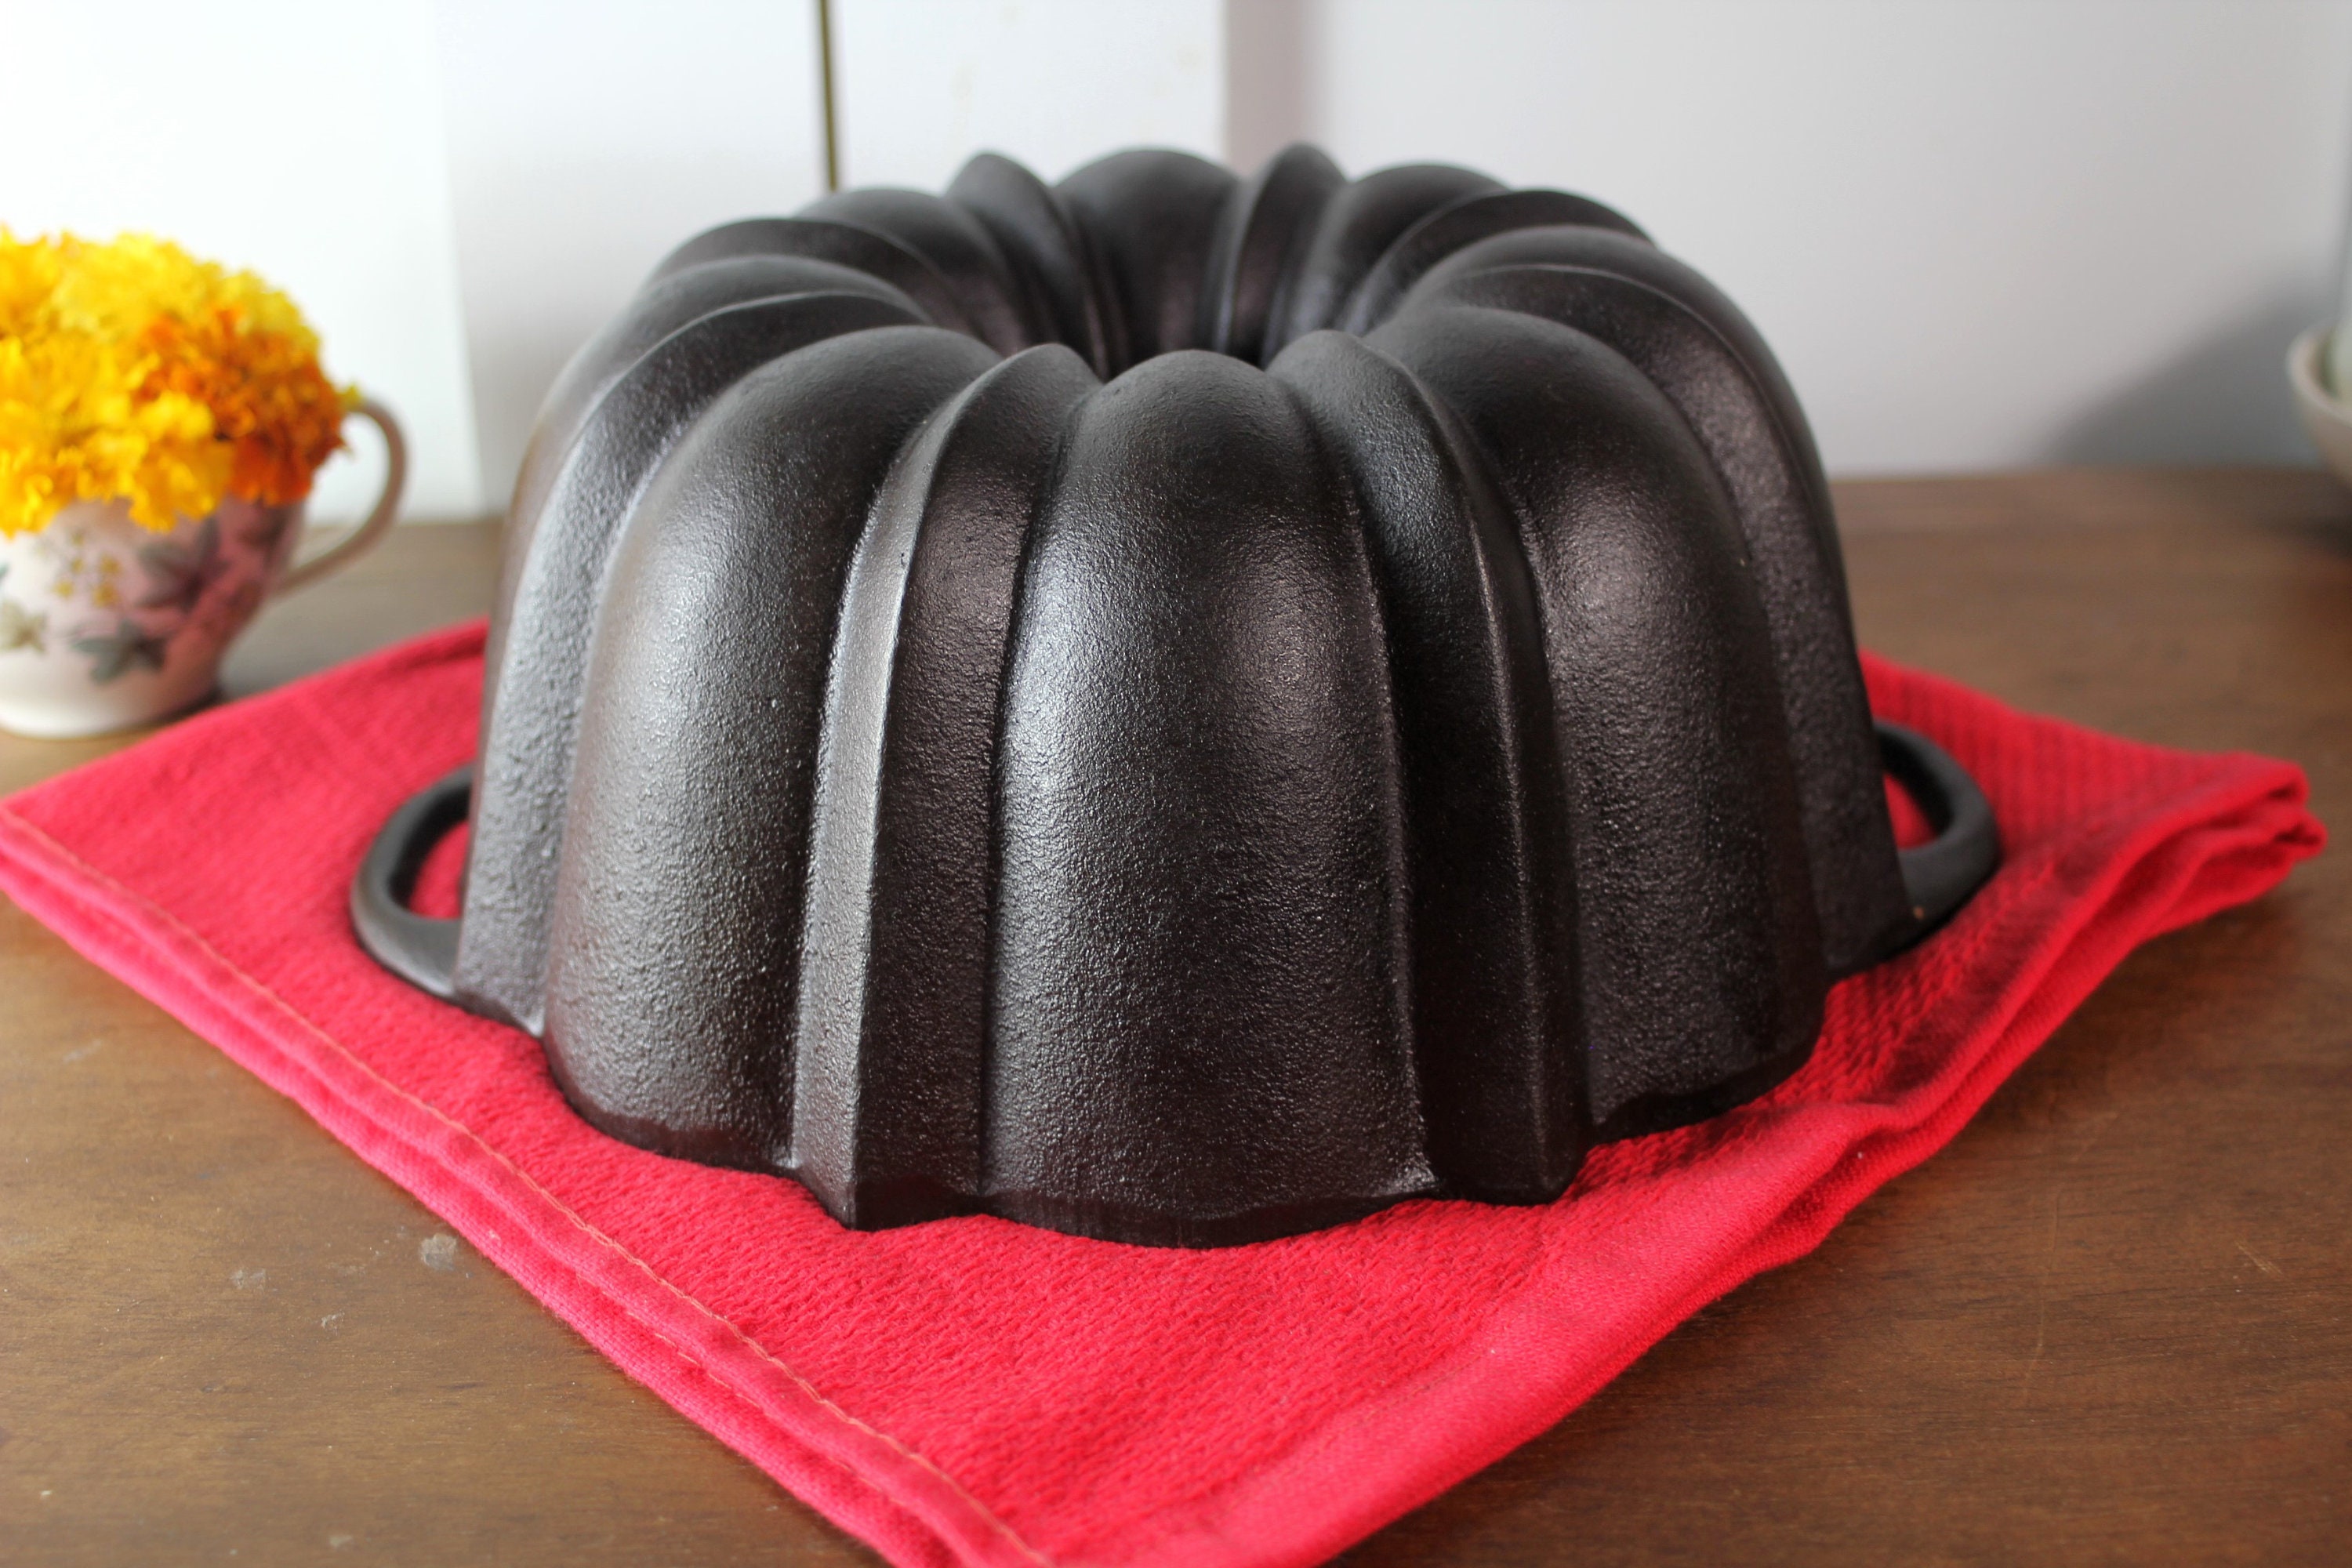 Unmarked Early / Primitive Cast Iron Bundt / Fluted Cake Pan, Restored